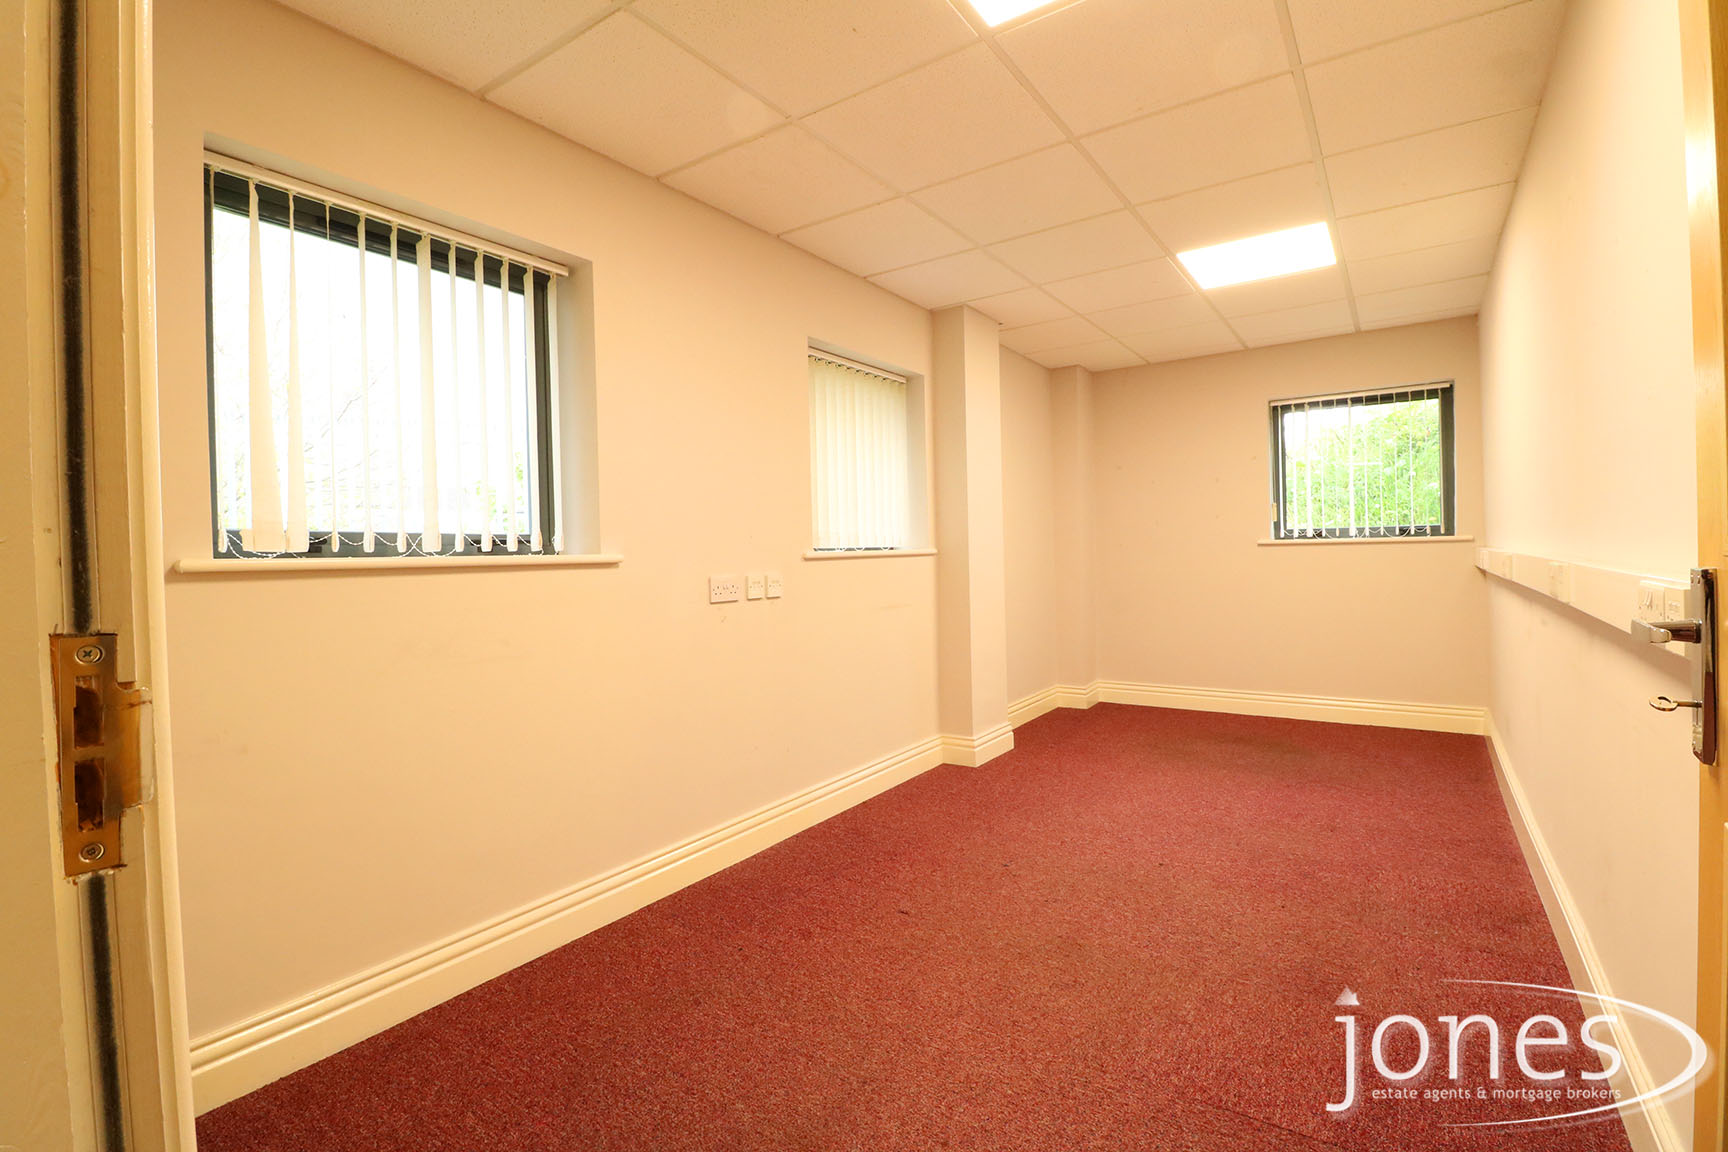 Home for Sale Let - Photo 08 Durham Tees Valley Business Centre Orde Wingate Way Primrose Hill Industrial Estate Stockton on Tees TS19 0GD